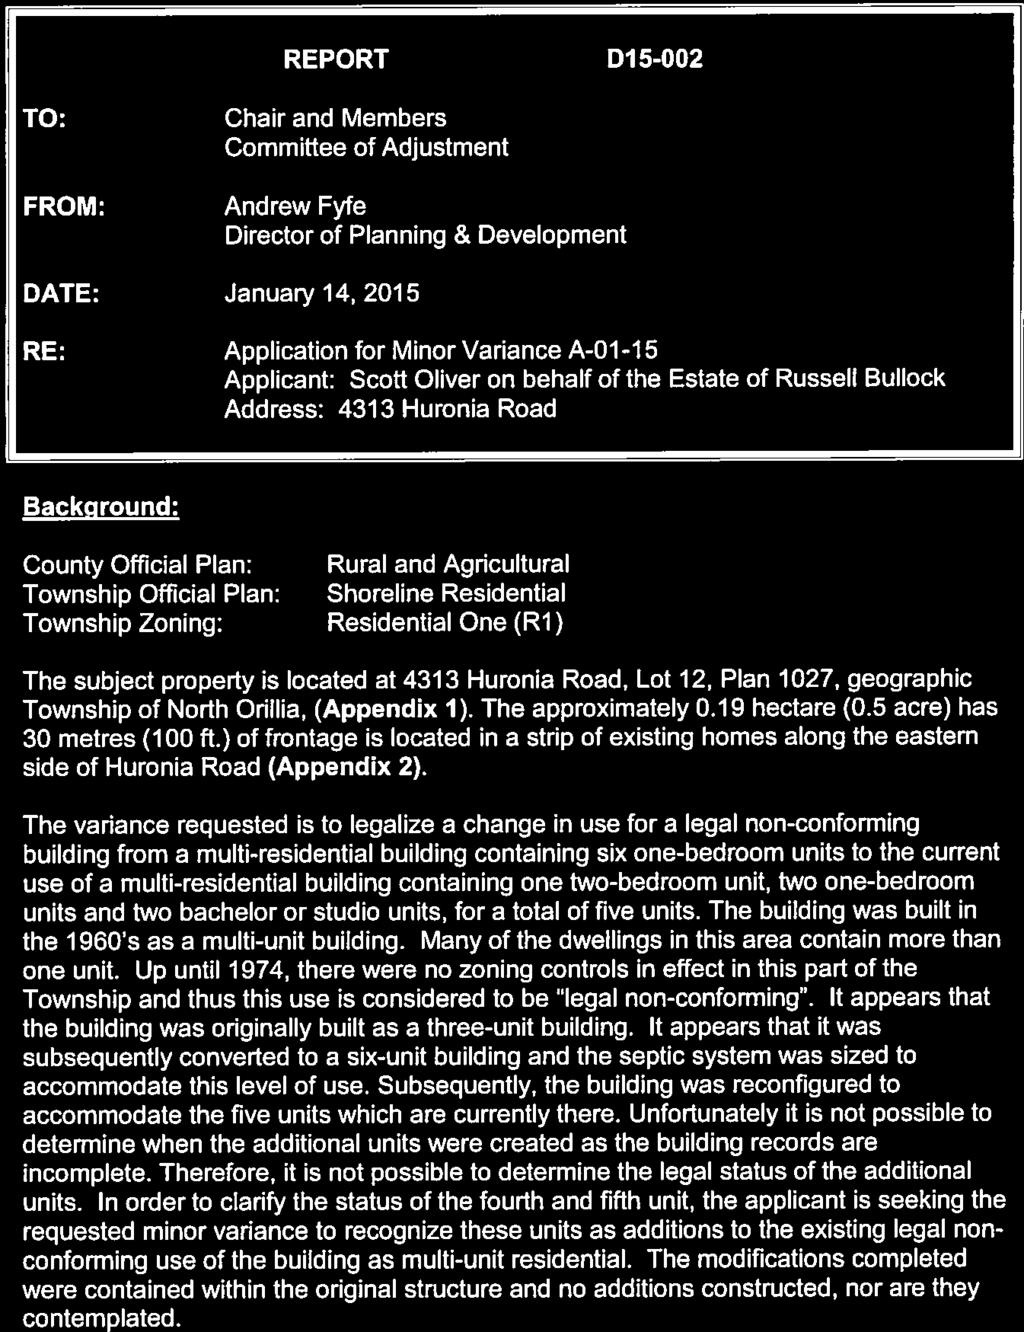 D-2 REPORT Dl 5-002 TO: FROM: Chair and Members Committee of Adjustment Andrew Fyfe Director of Planning & Development DATE: January 14, 2015 RE: Application for Minor Variance A-01-15 Applicant: